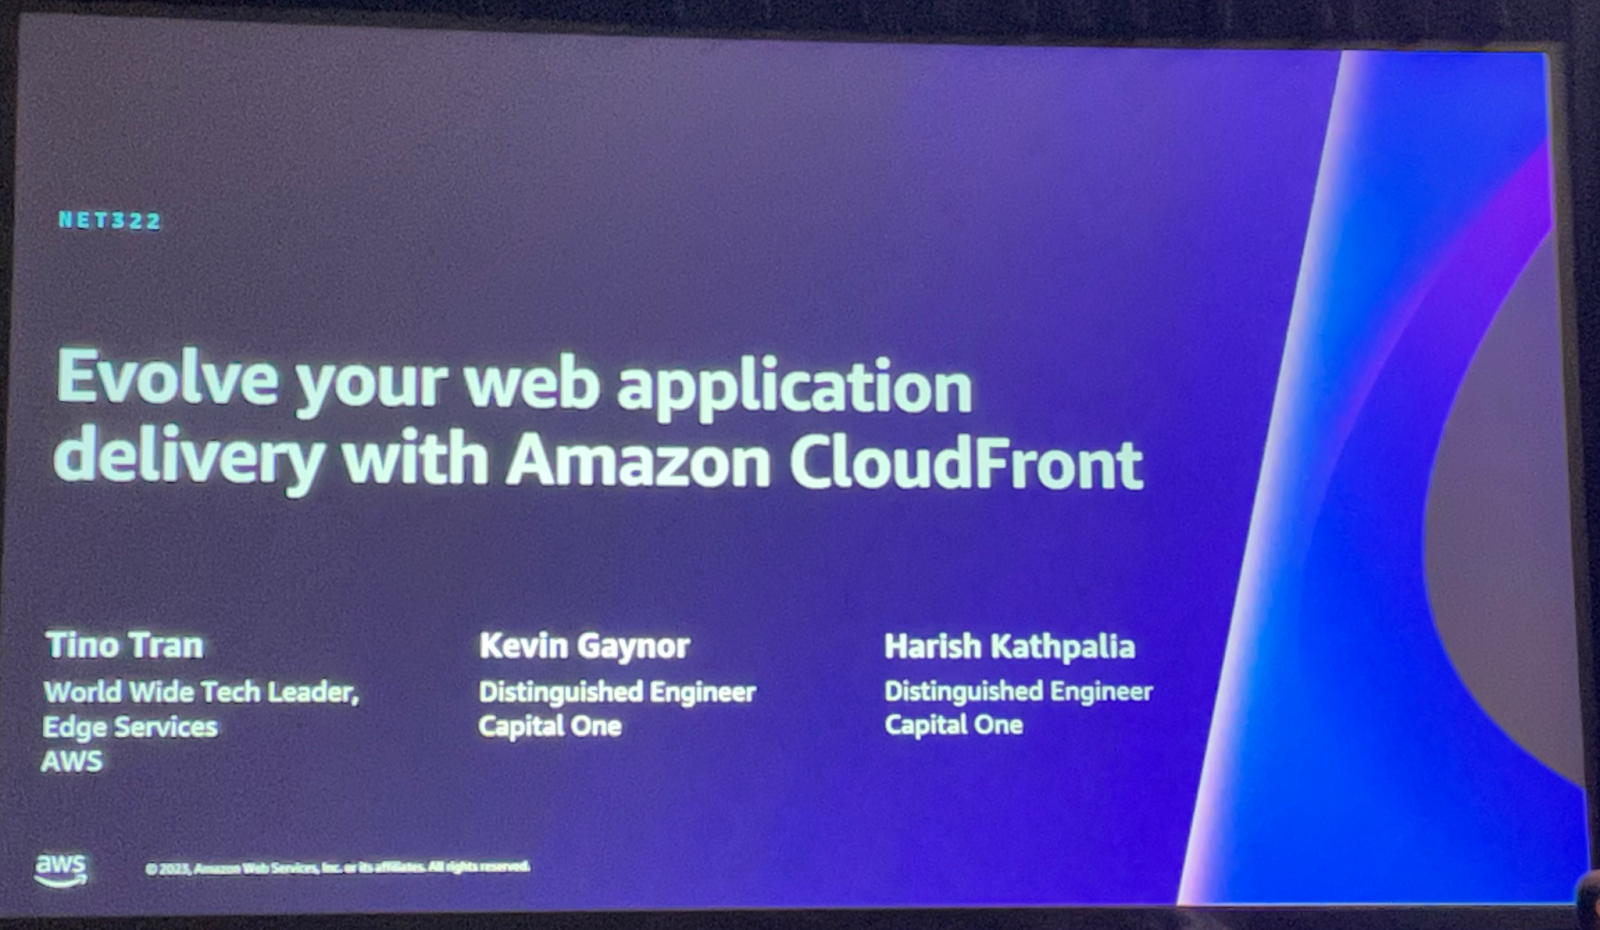 Evolve your web application delivery with Amazon CloudFront